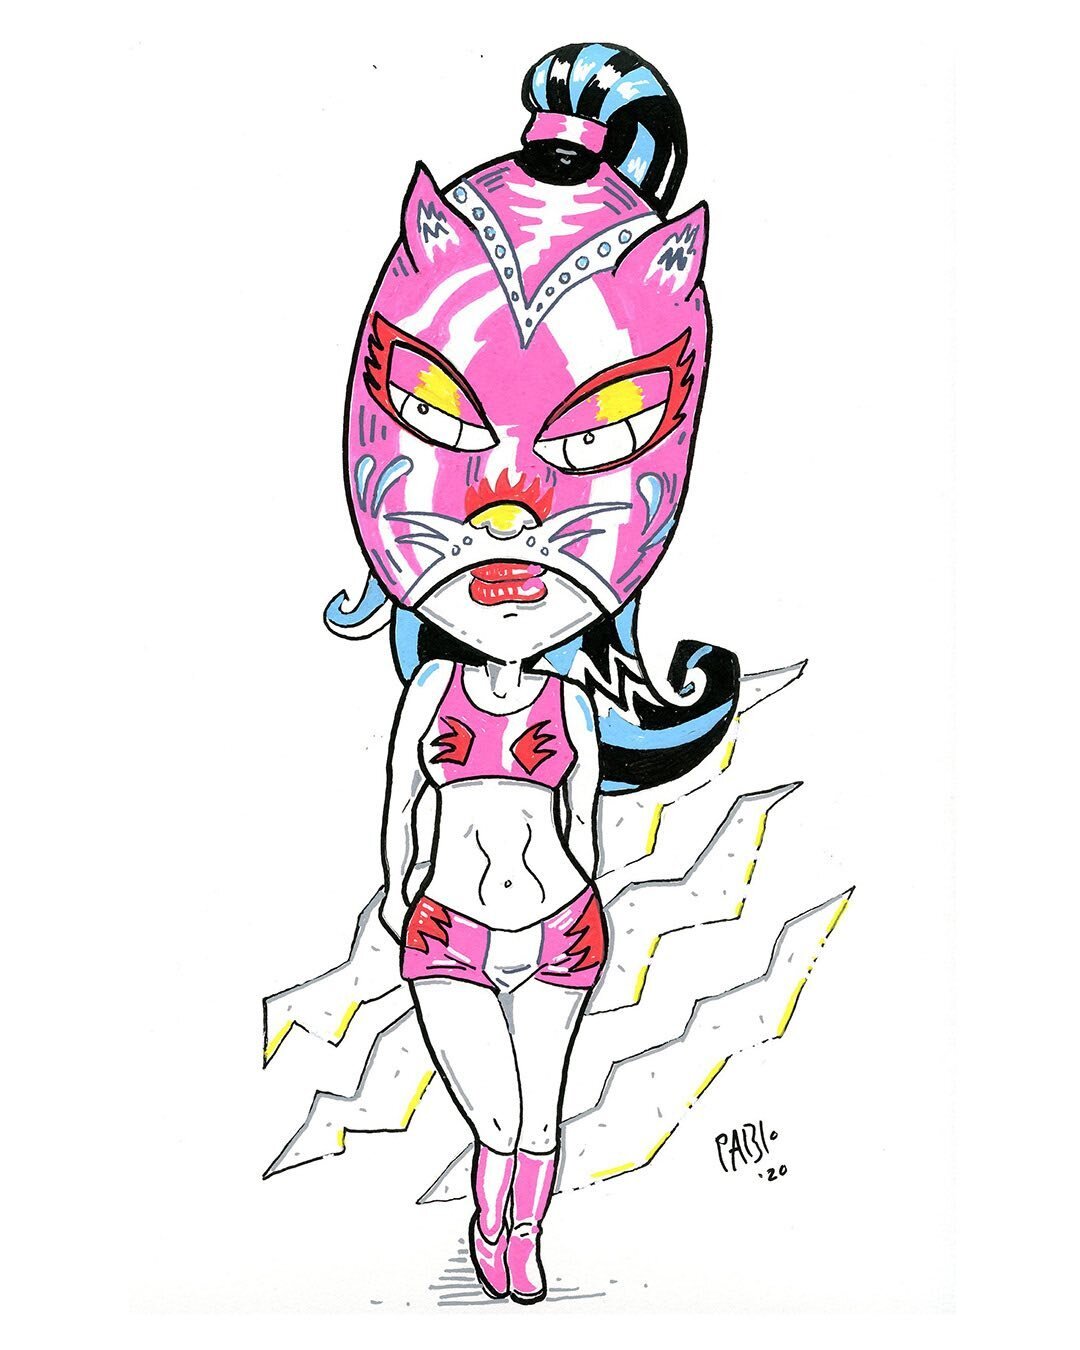 Lucha - The Kitty acrylic pens on paper #luchadora #lucha #hand drawn #mexican wrestlers